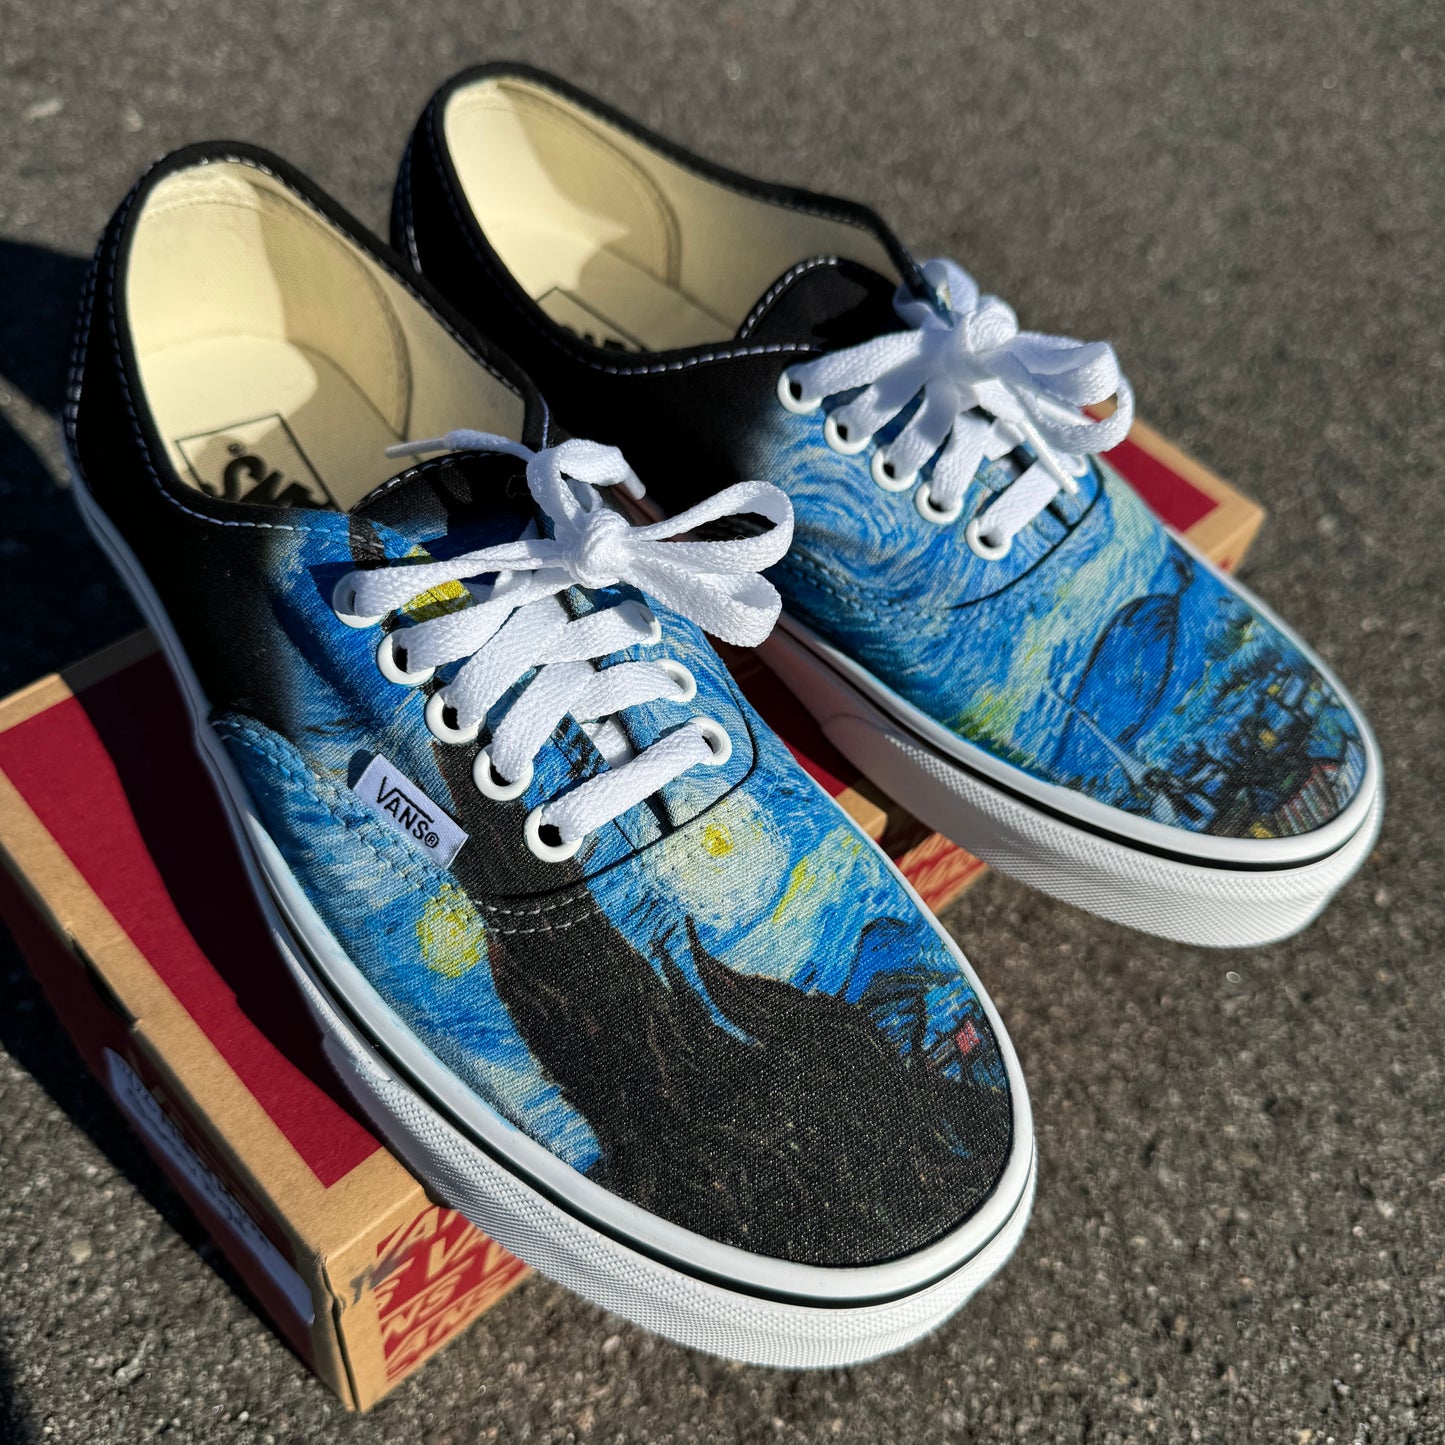 Starry Night Authentic Shoes Unisex for Men and Women